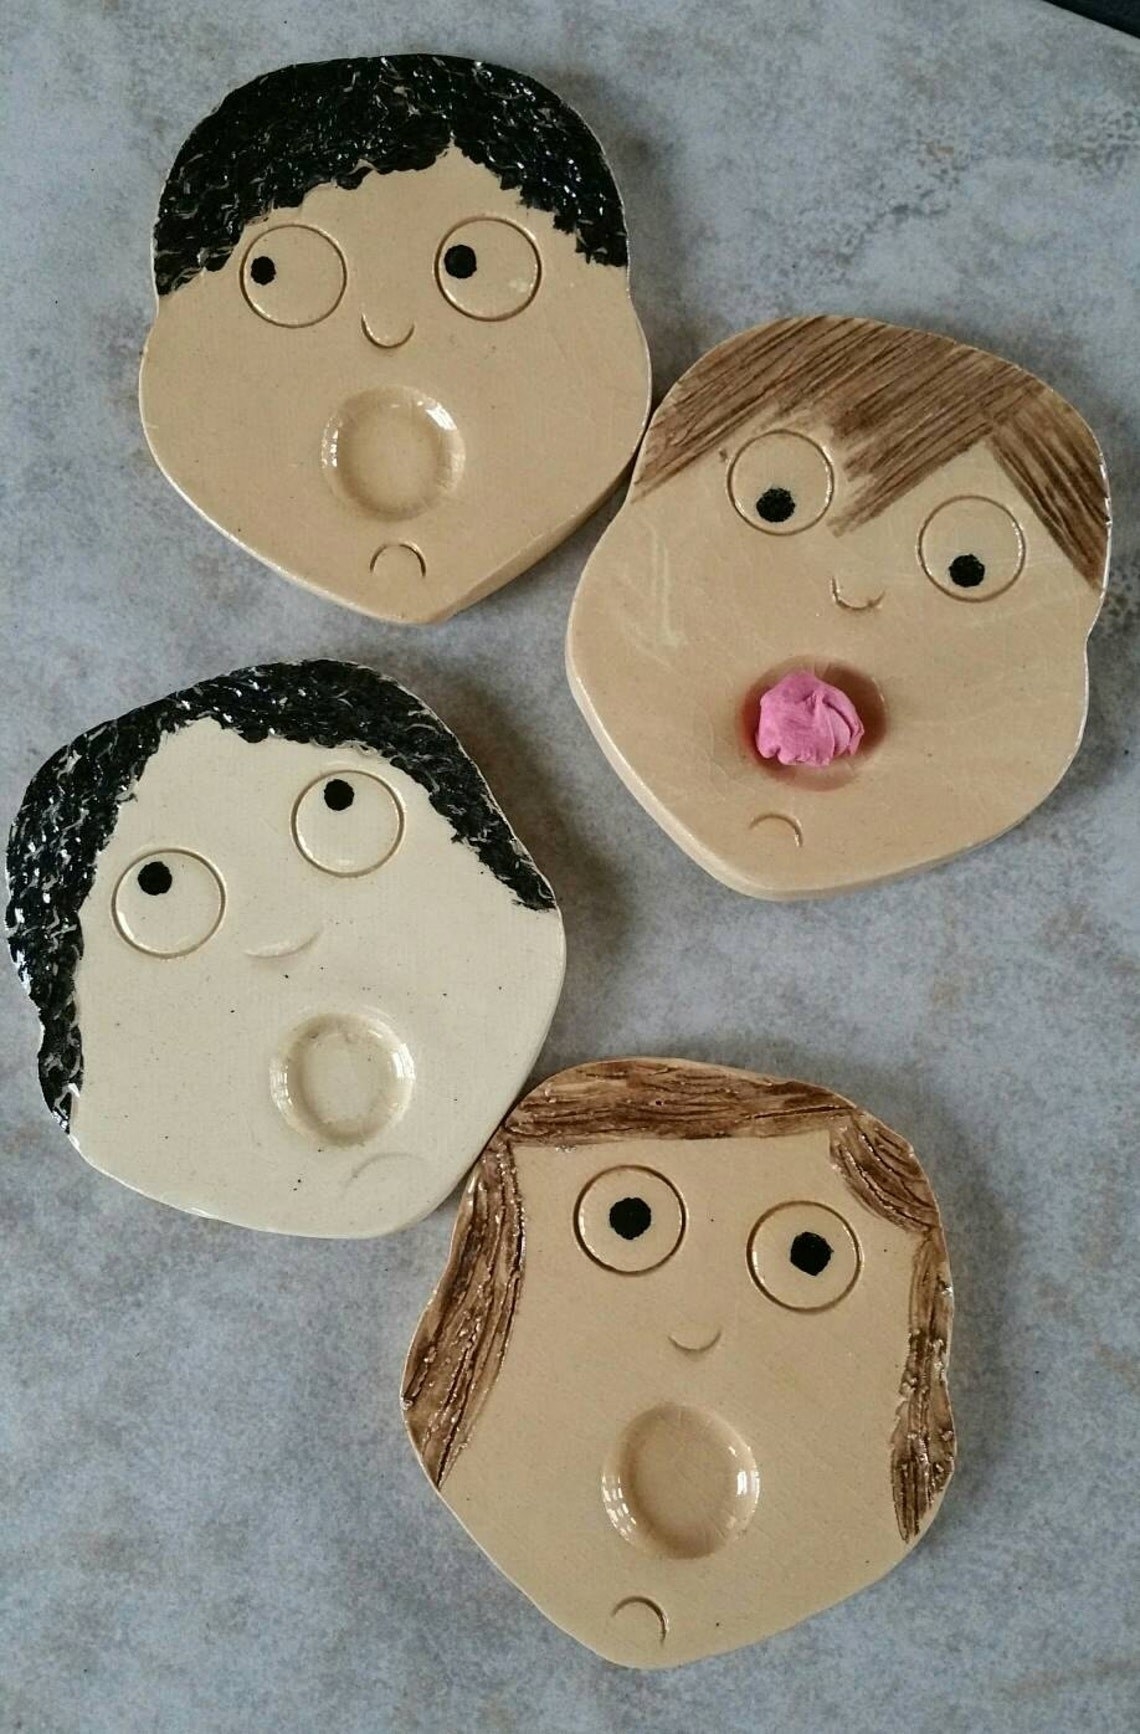 face-shaped plates with open mouths for gum to be put in